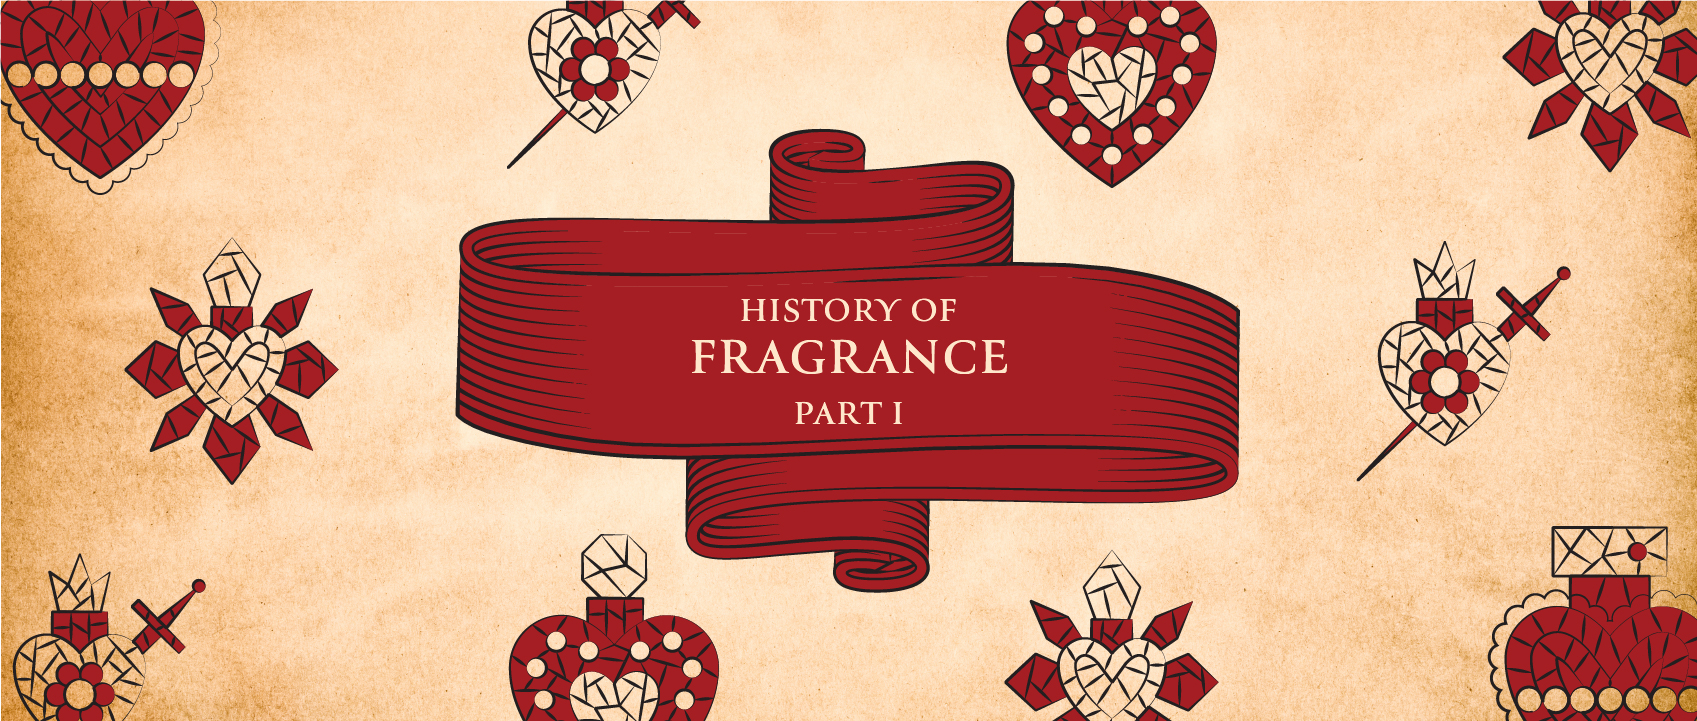 history of fragrance part 1 on parchment with illustrations of heart perfume bottles